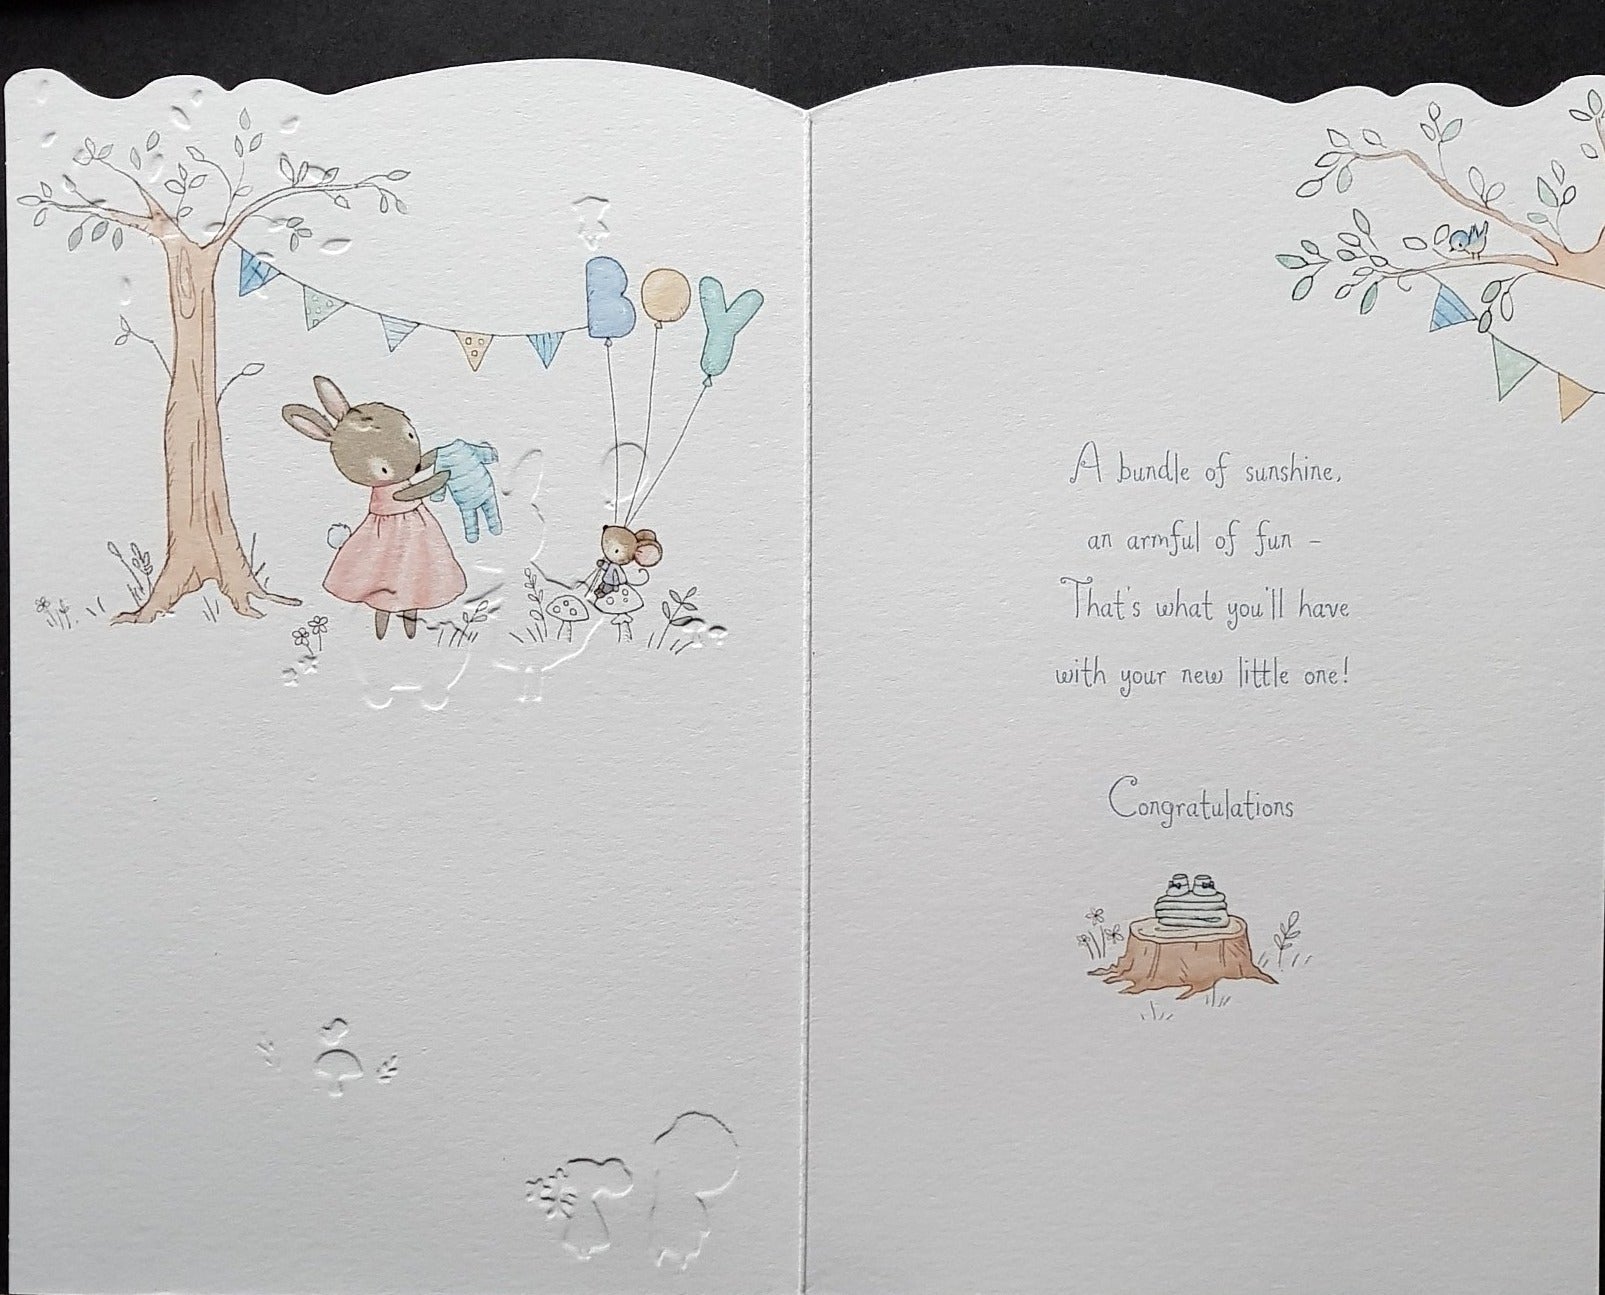 New Baby Card - Boy / Bunny Holding A Yellow Balloon And Taking Care Of Little One